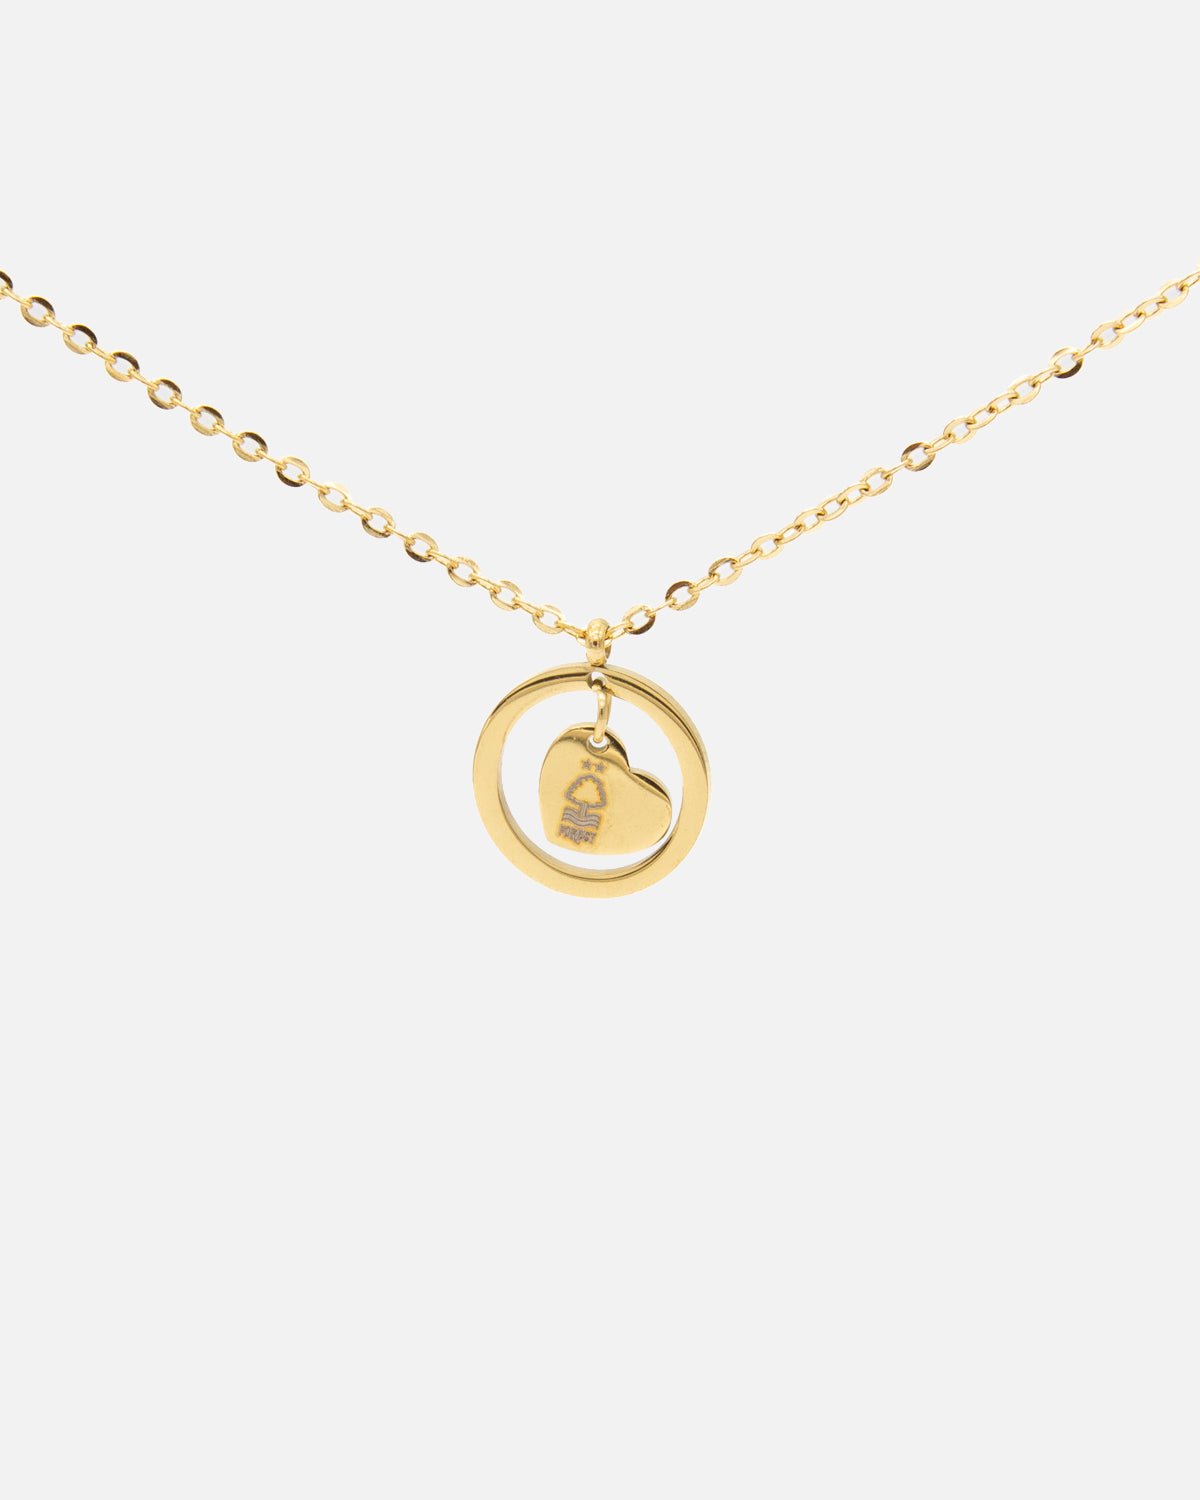 NFFC Gold Plated Hanging Heart Necklace - Nottingham Forest FC